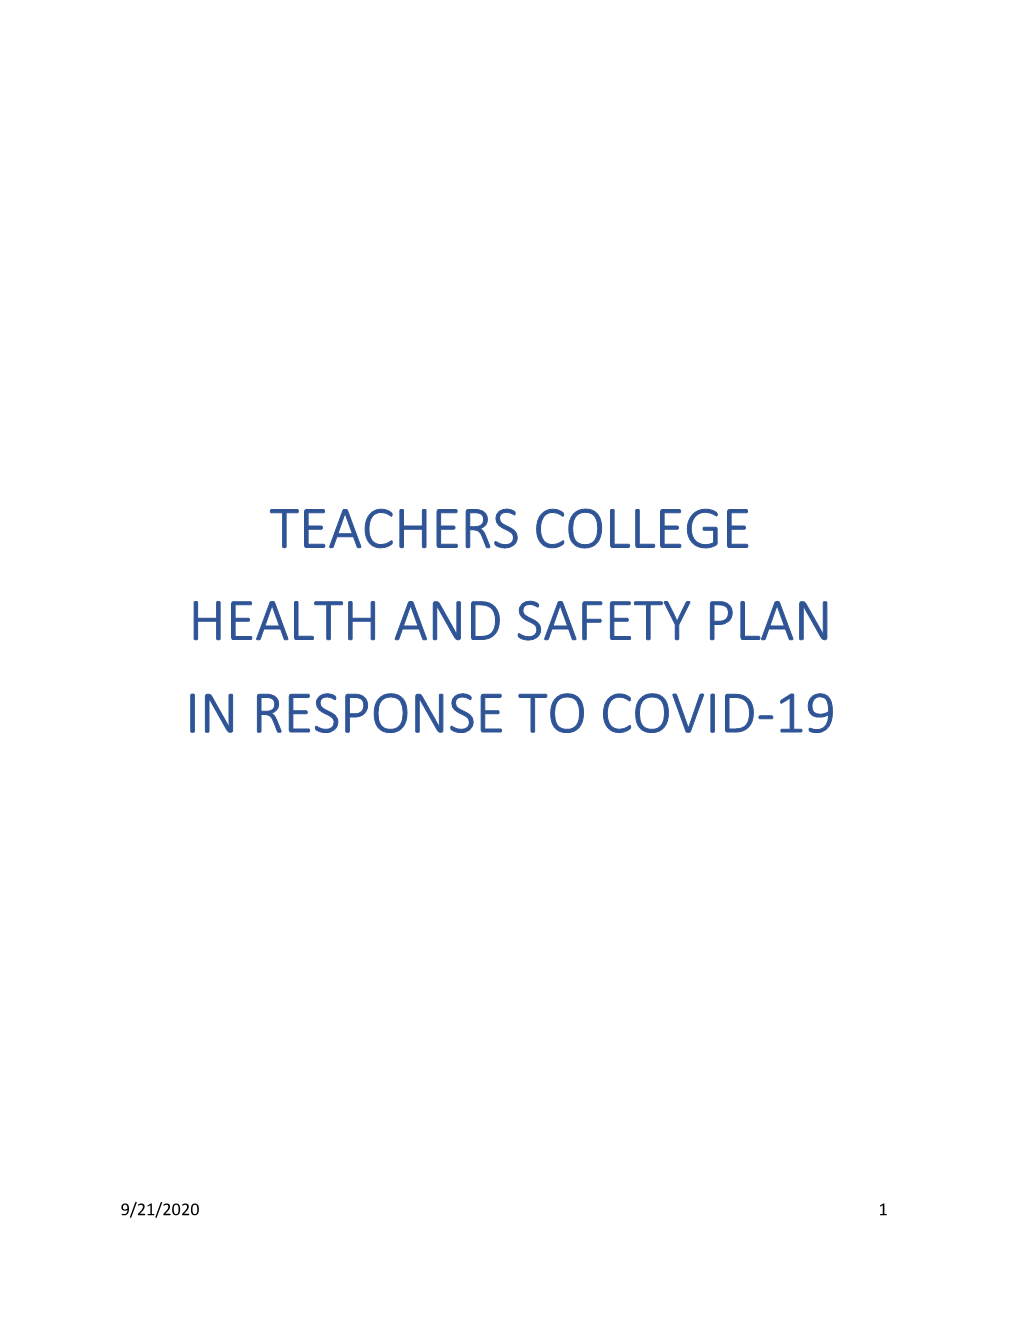 Teachers College Health and Safety Plan in Response to Covid-19